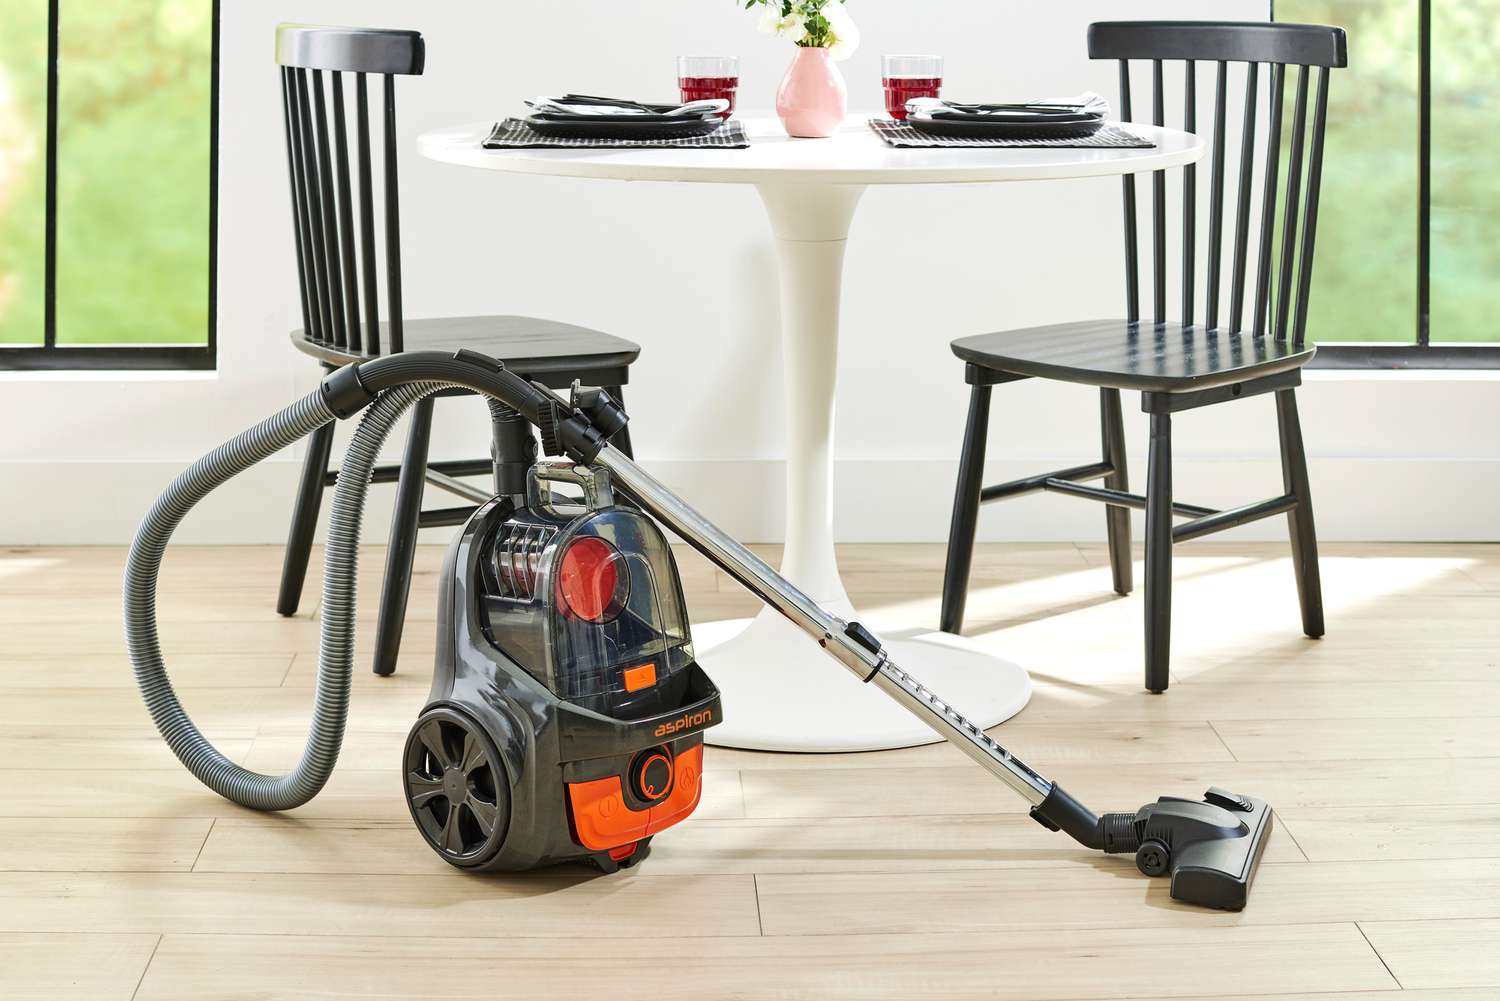 The Aspiron Canister Vacuum